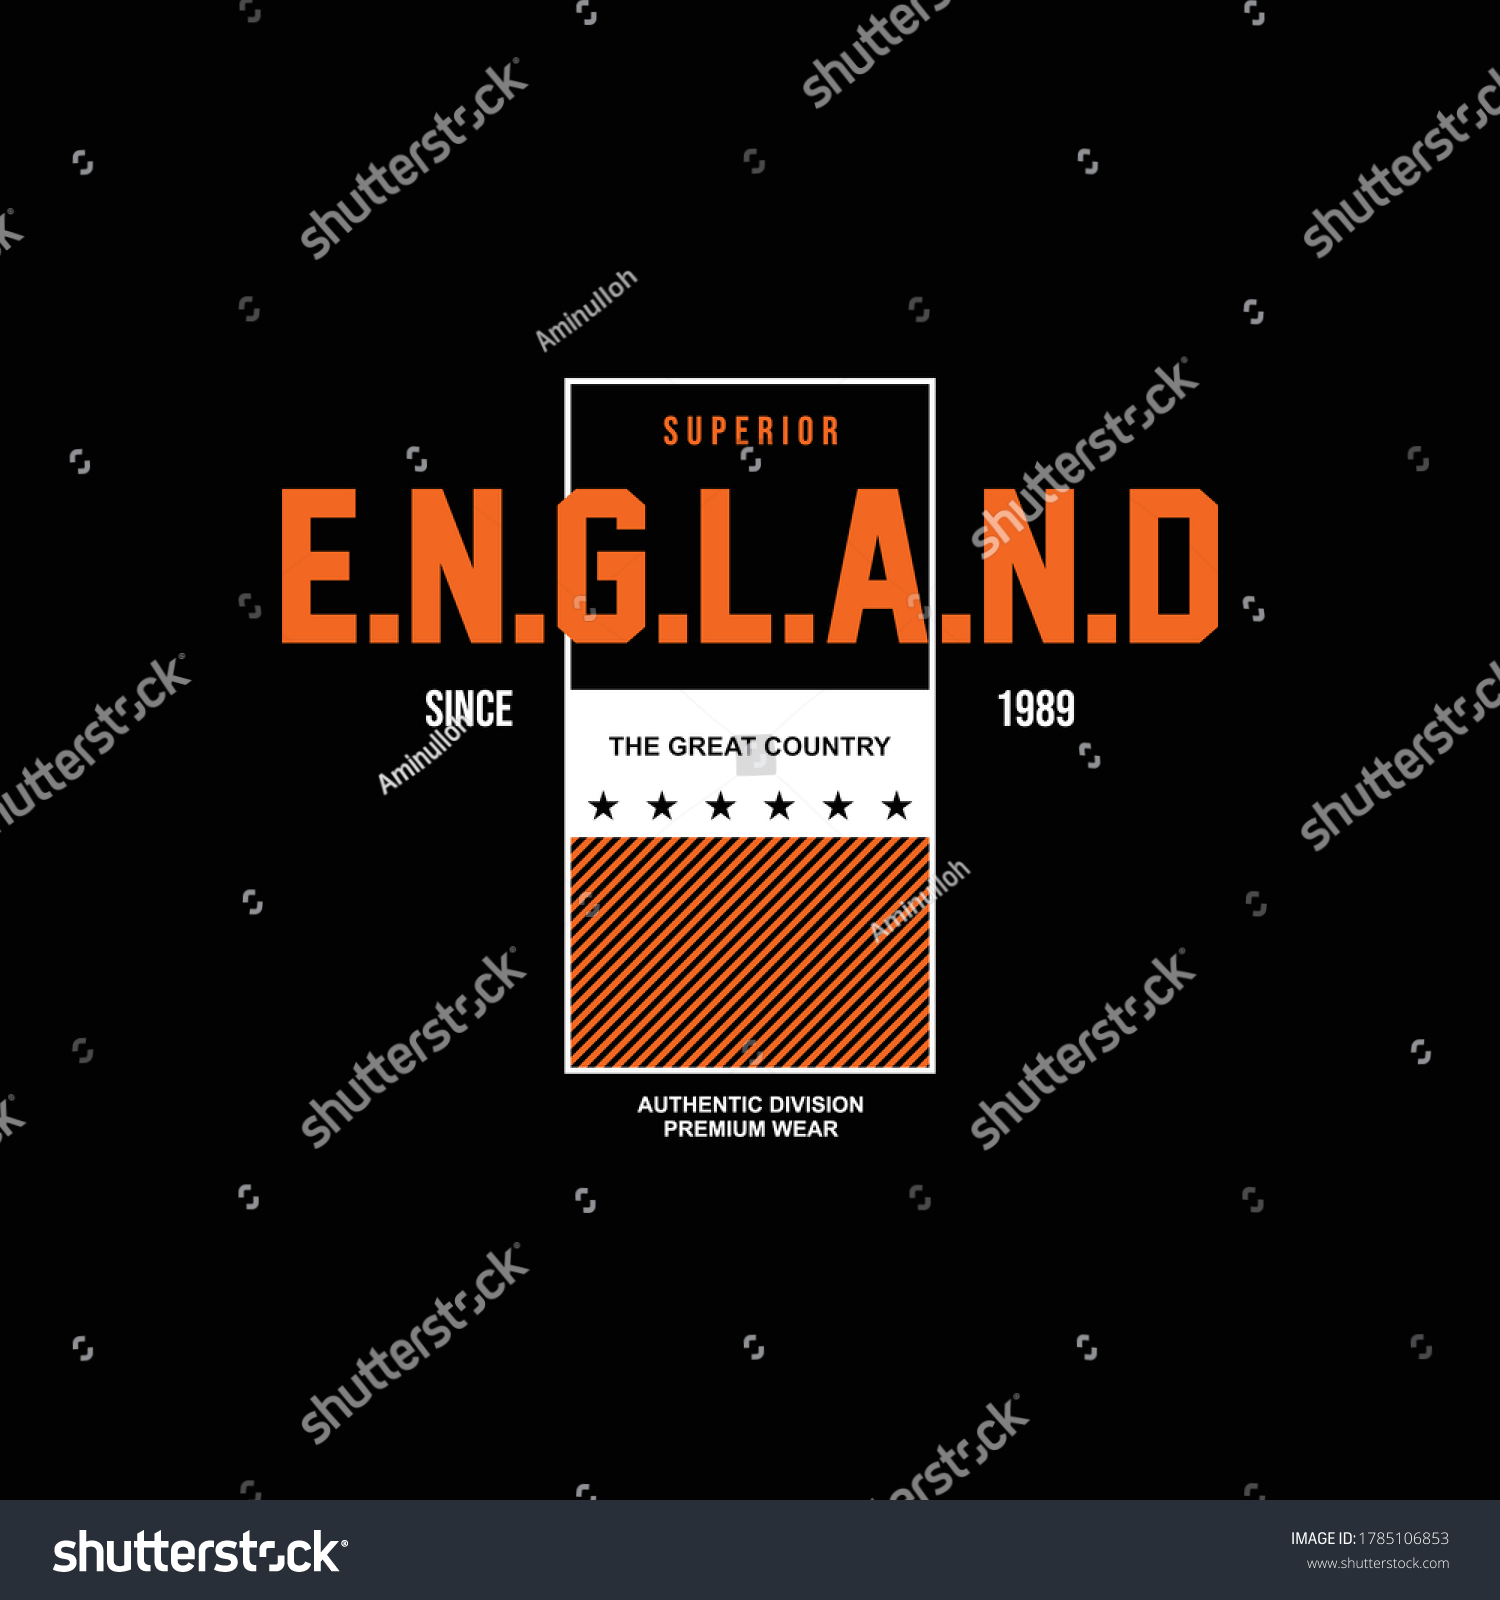 England Superior Great Country Vintage Stock Vector (Royalty Free ...